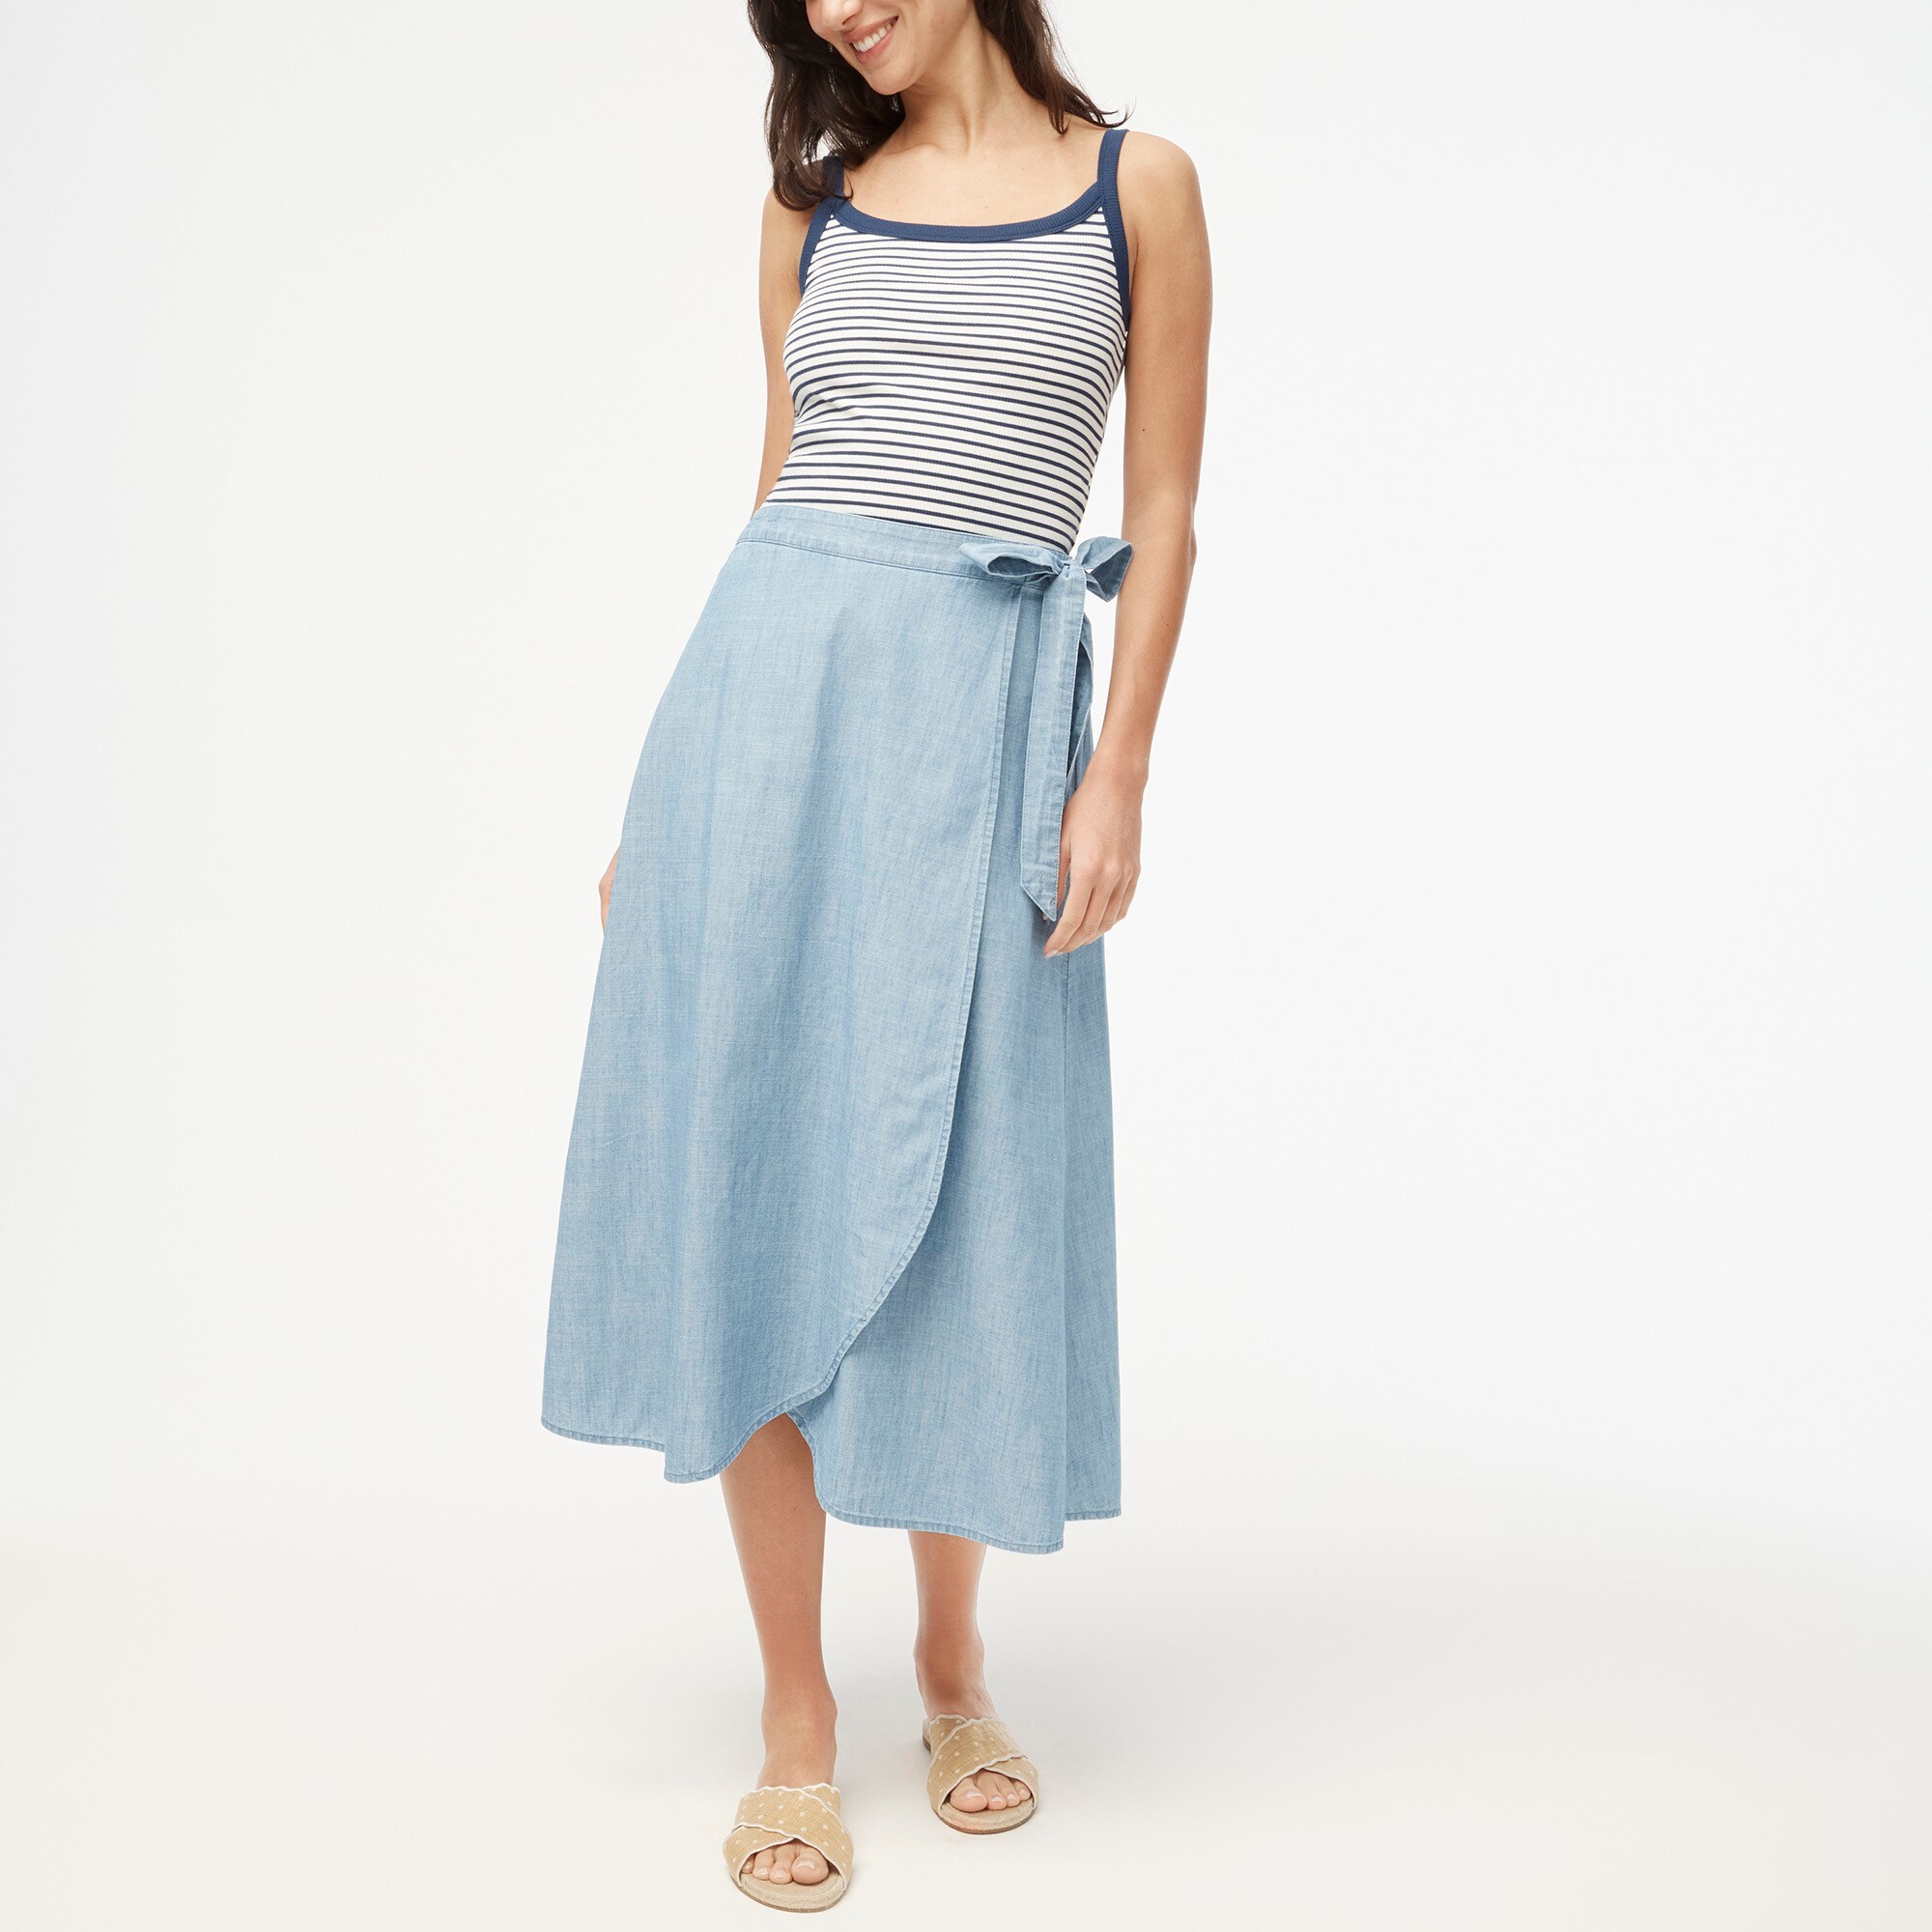  Chambray pull-on faux-wrap skirt